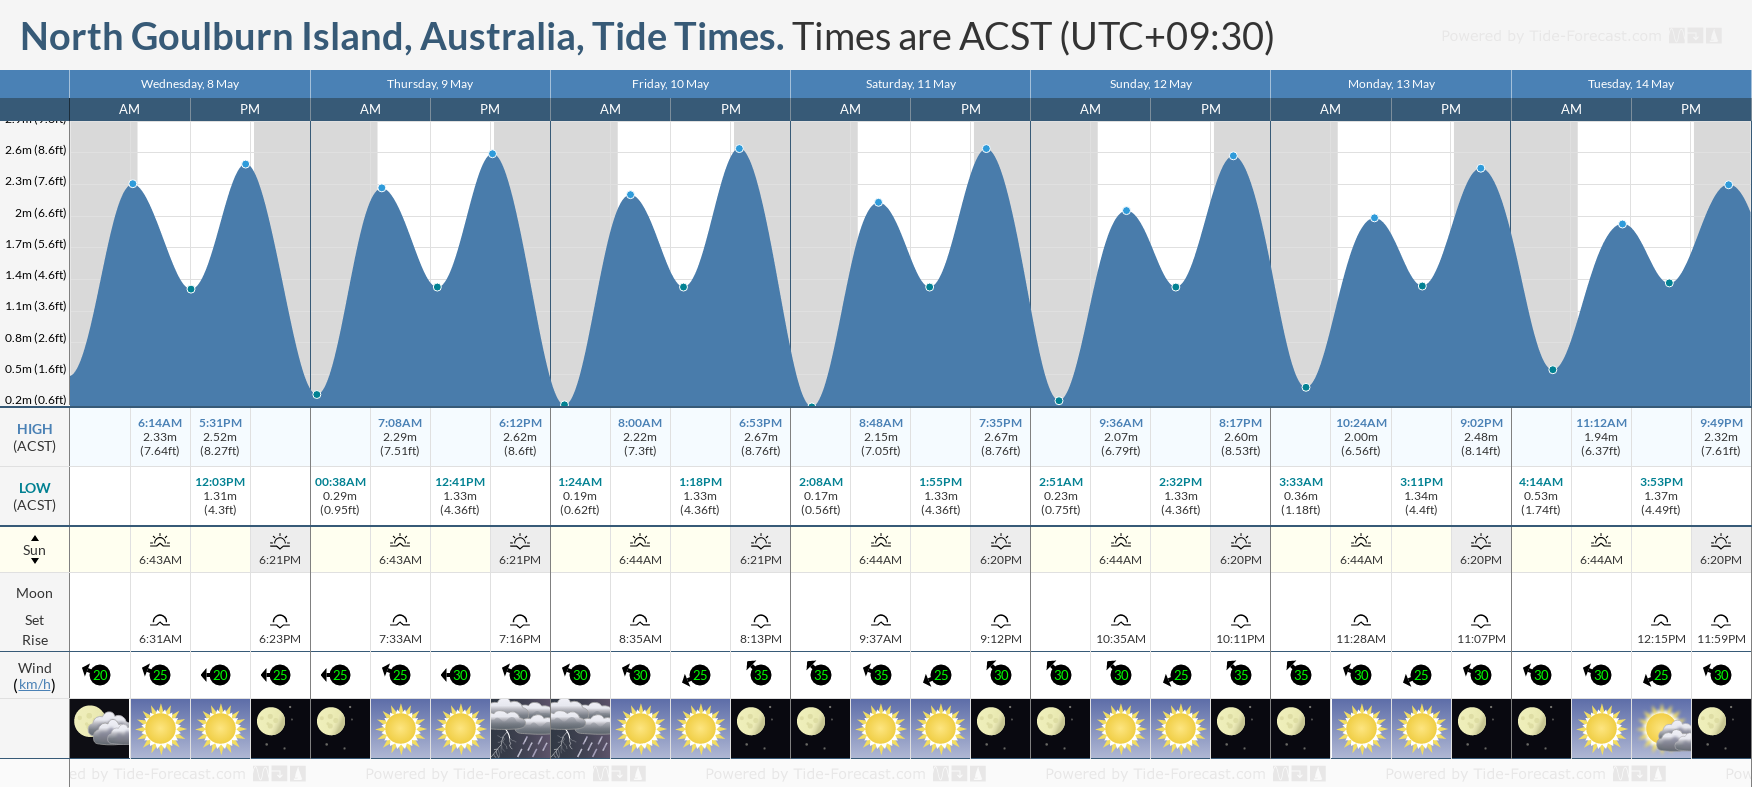 North Goulburn Island, Australia Tide Chart including high and low tide tide times for the next 7 days